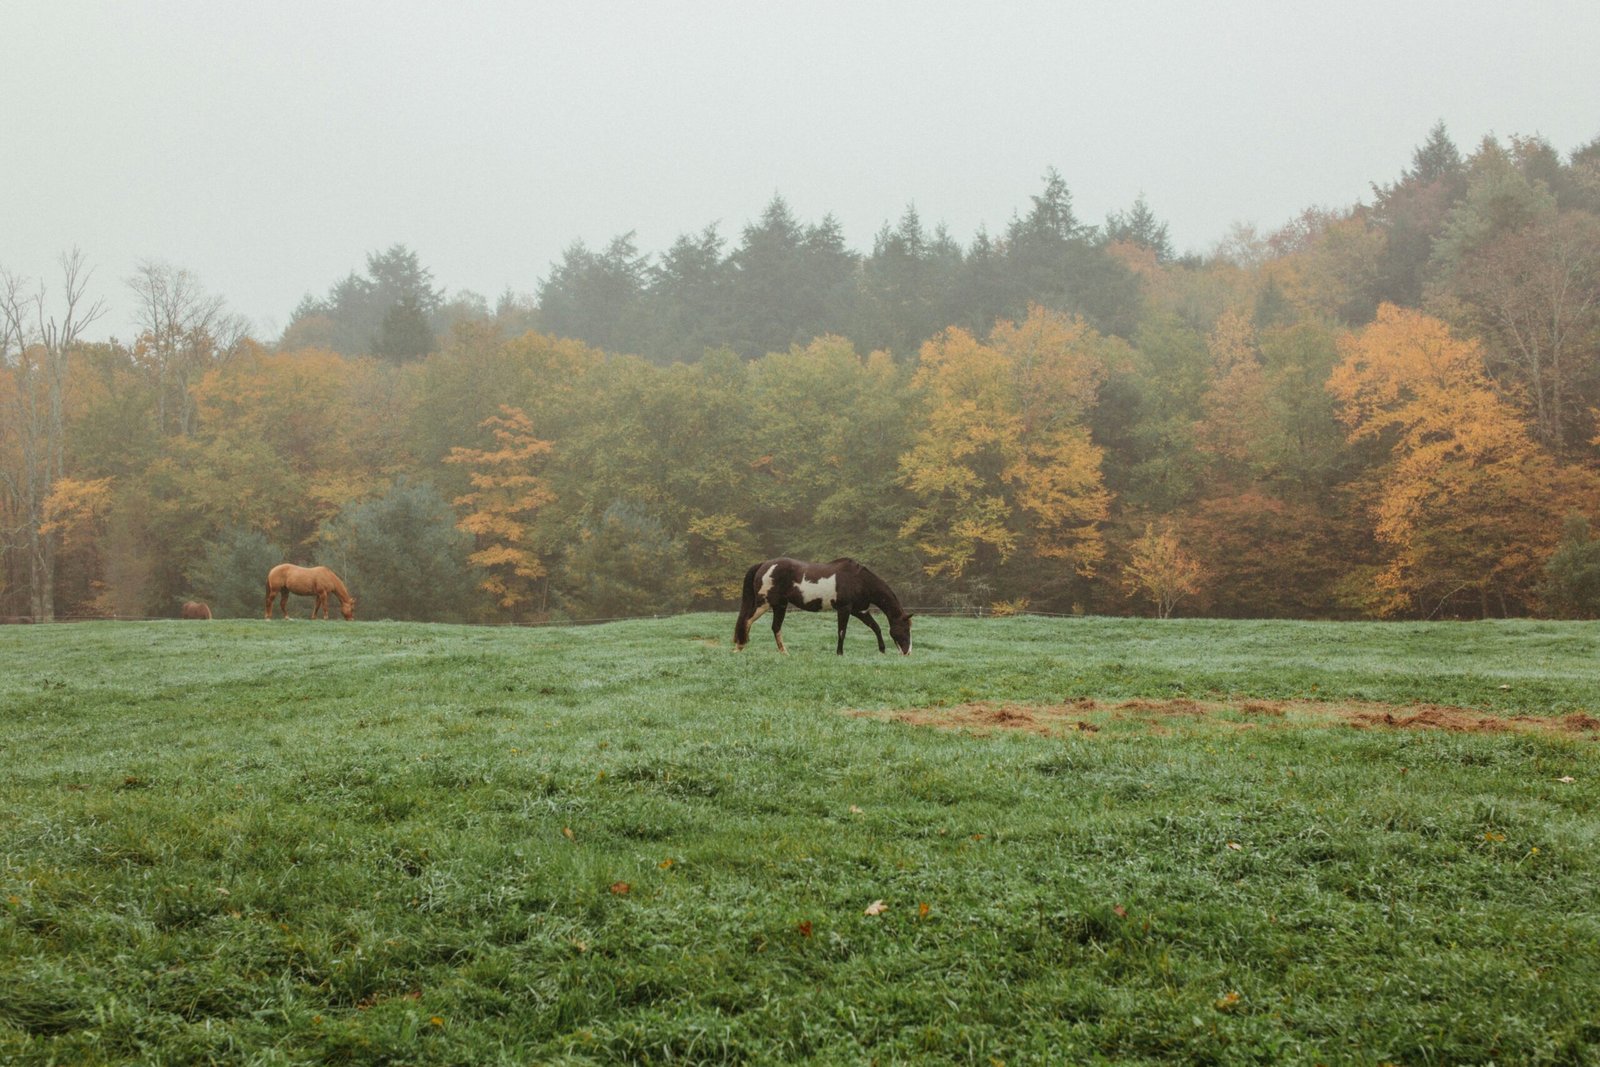 horses eating grass on green grass field during daytime